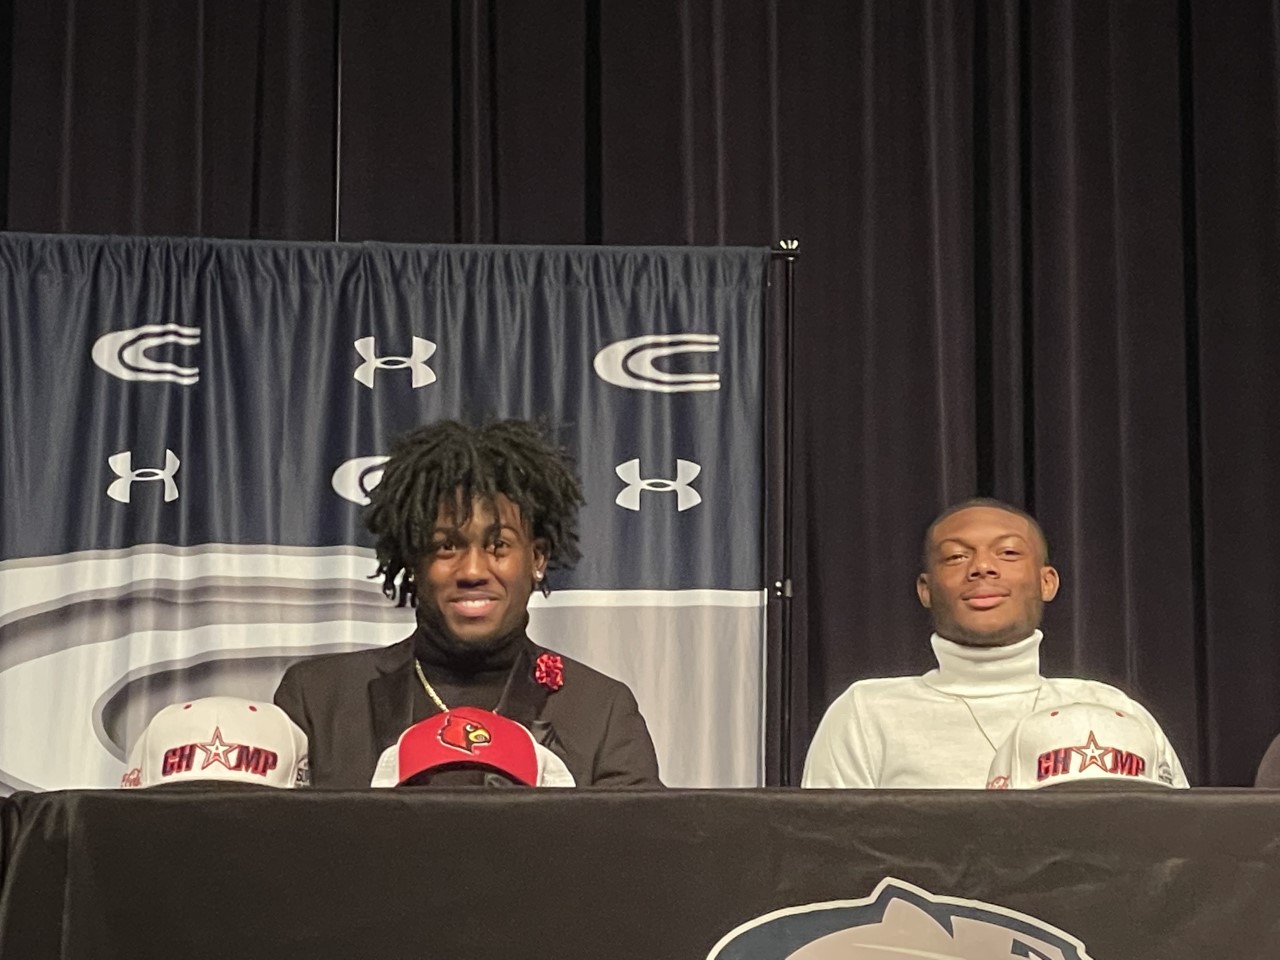 Clay-Chalkville athletes sign letters of intent